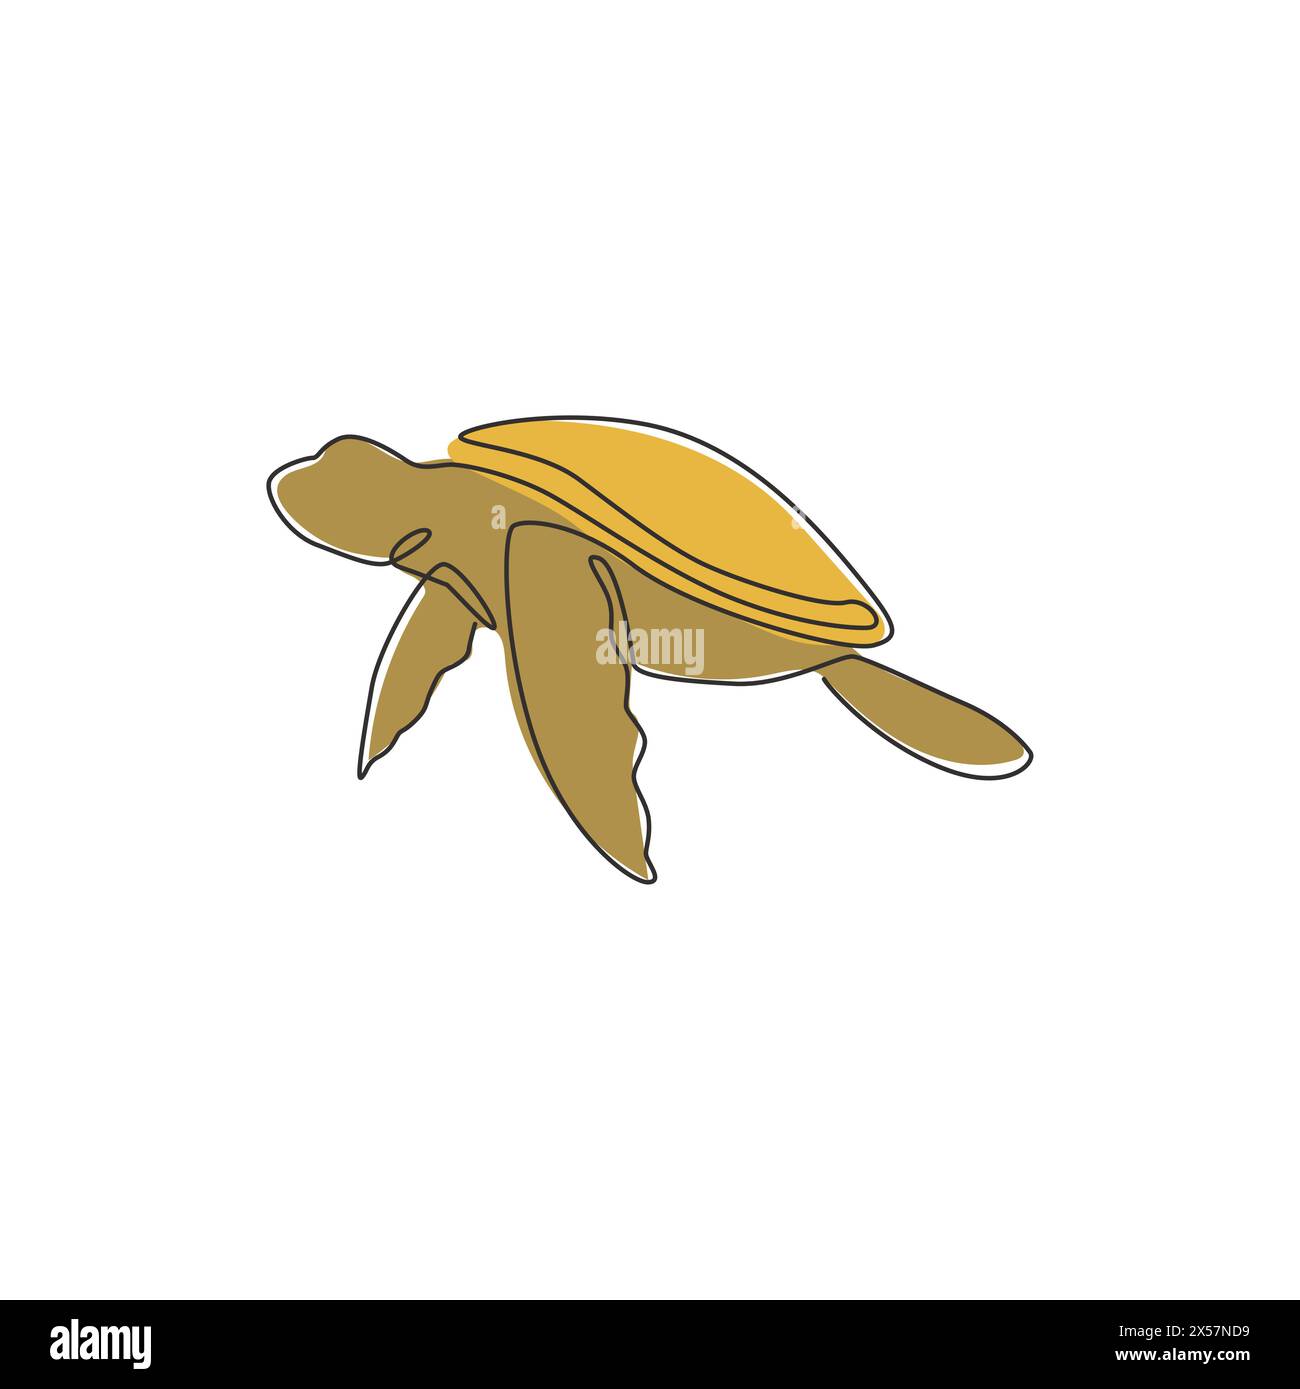 One single line drawing of big turtle for marine company logo identity. Adorable creature reptile animal mascot concept for conservation foundation. C Stock Vector